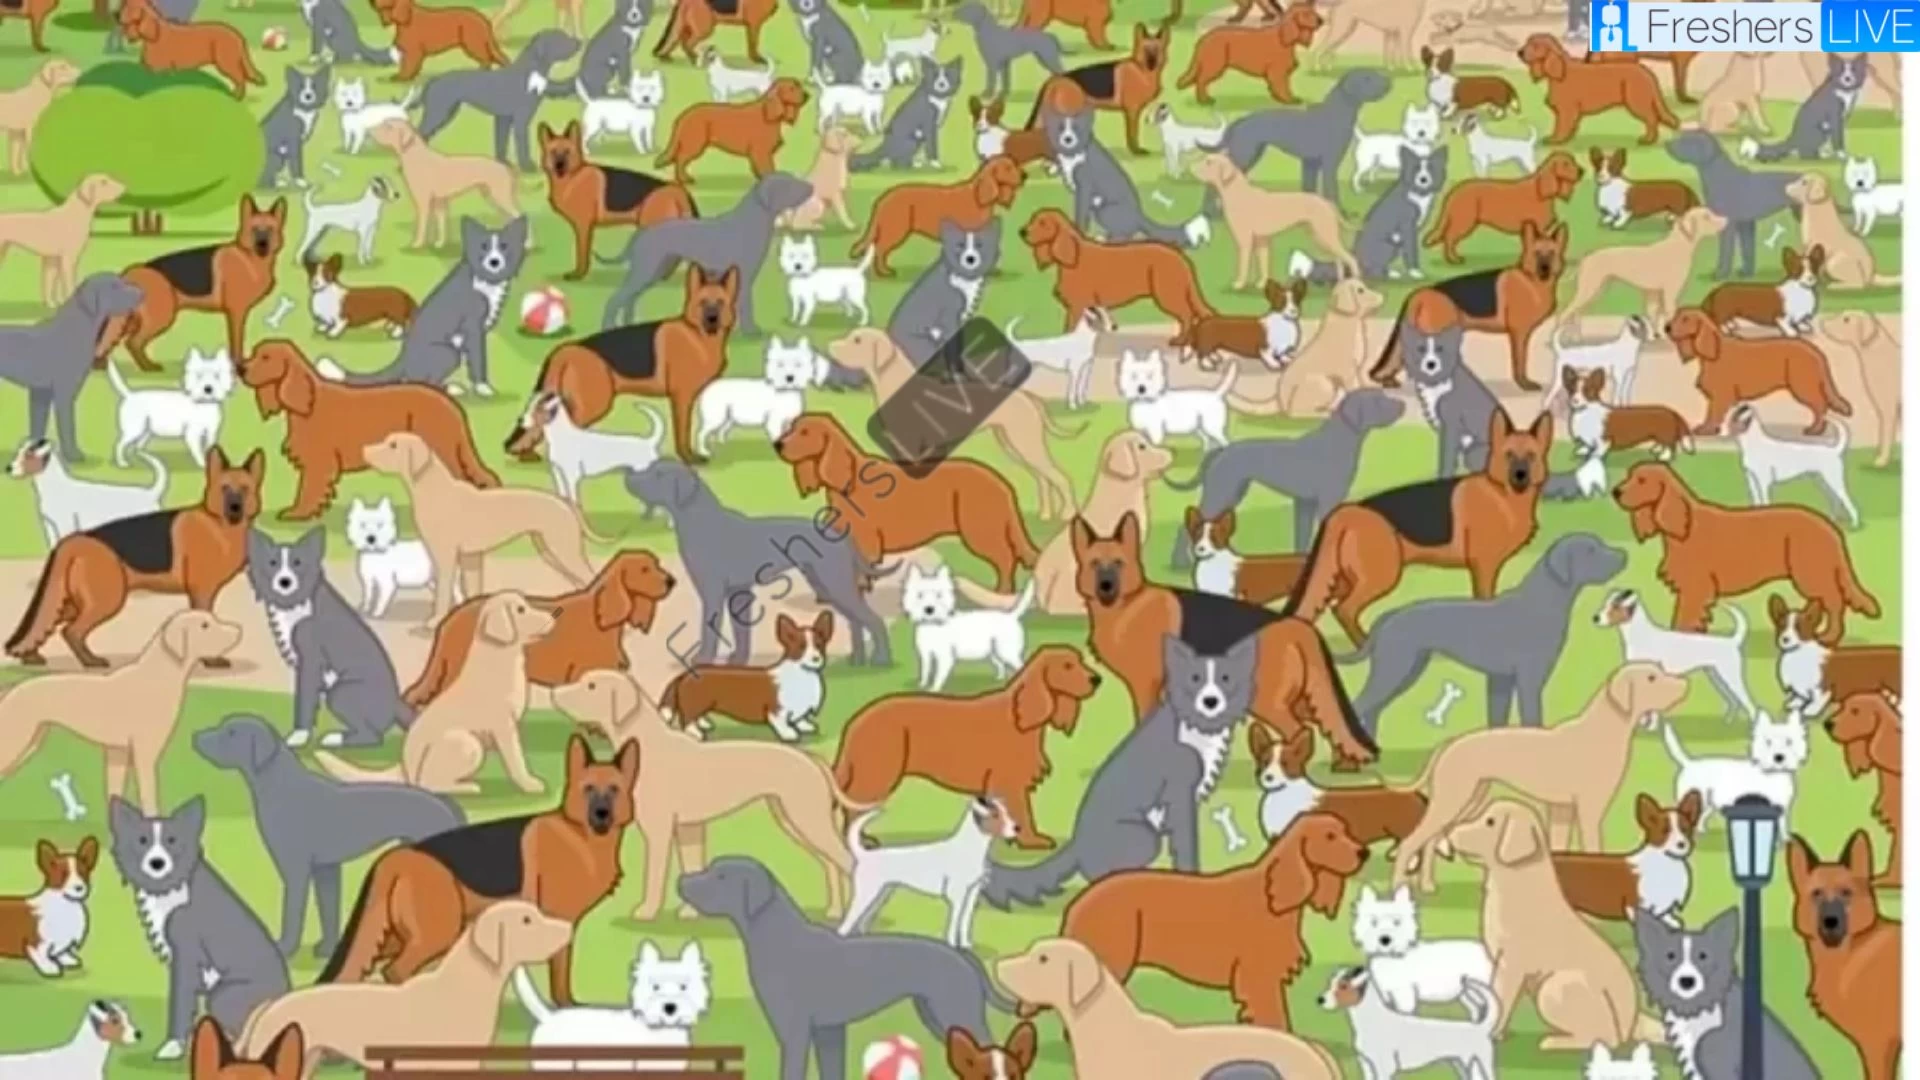 Only 4k Vision People Can Spot The Puppy Hidden Among The Adult Dogs?